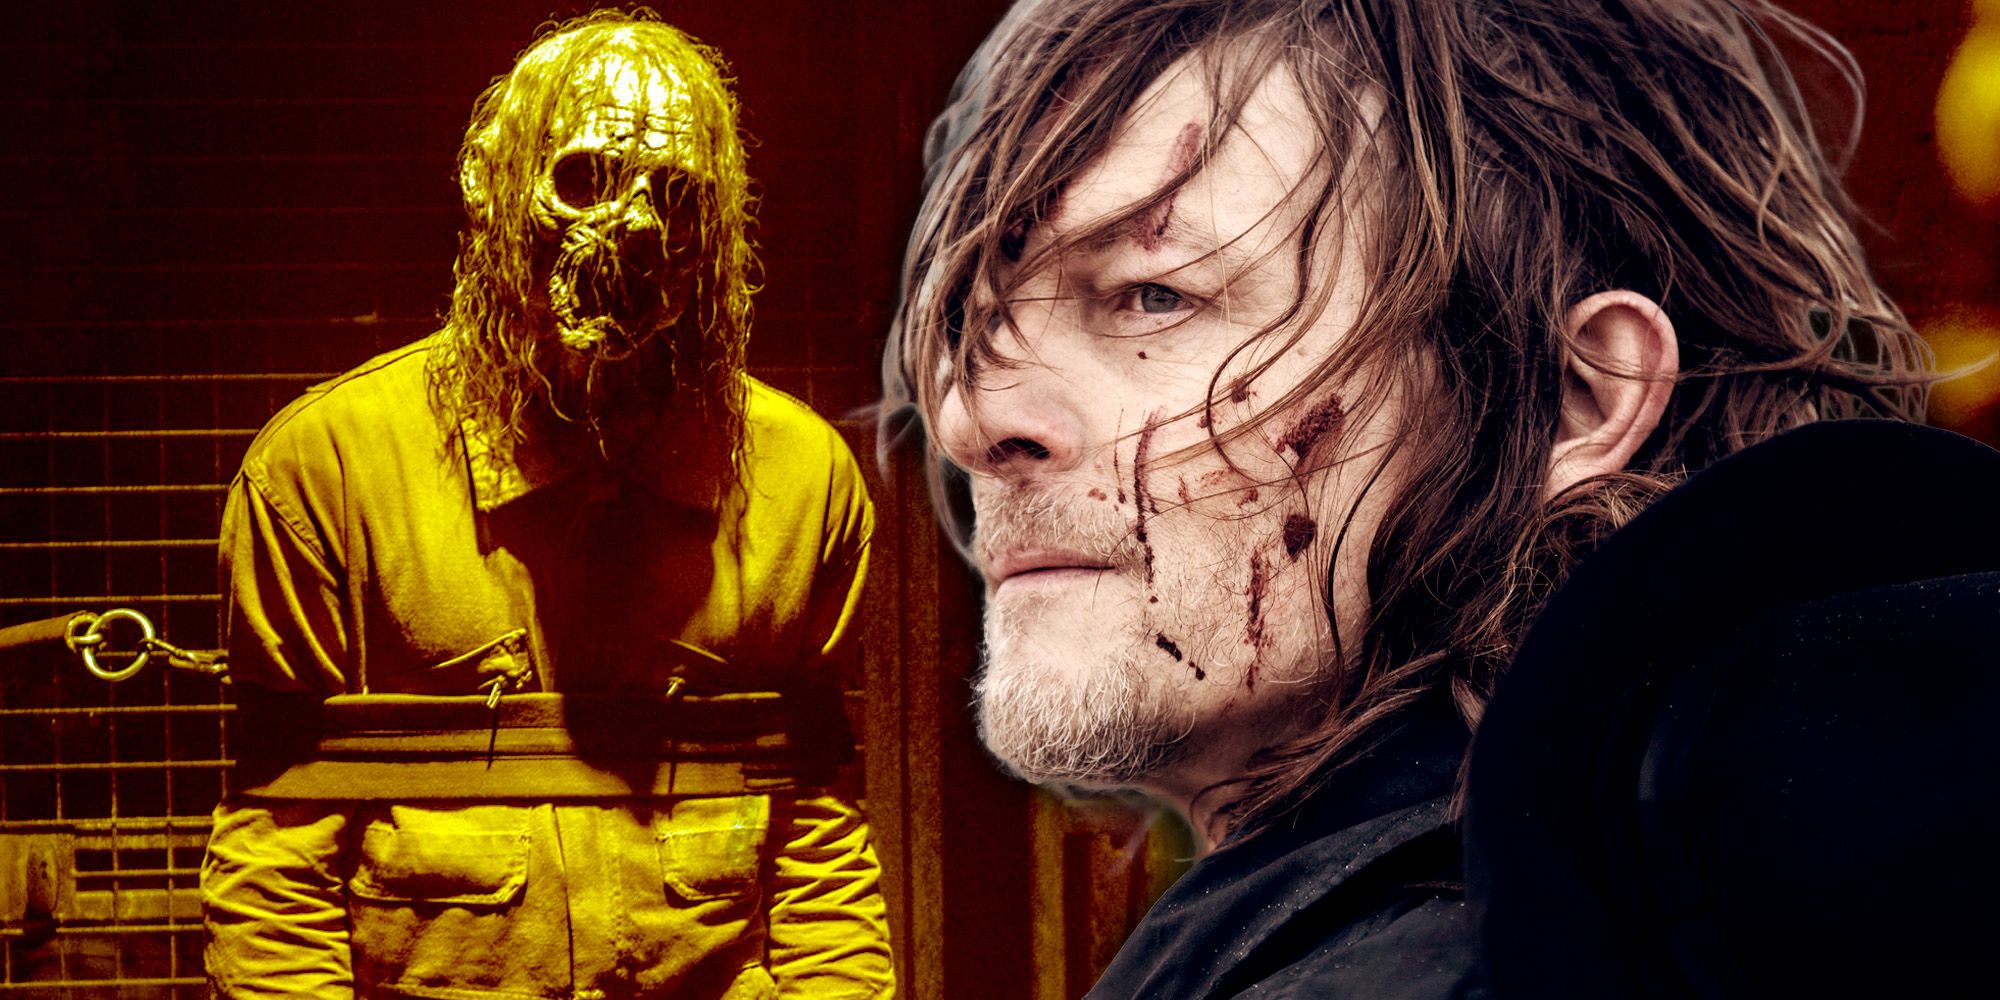 All 4 Upcoming Walking Dead Shows Explained